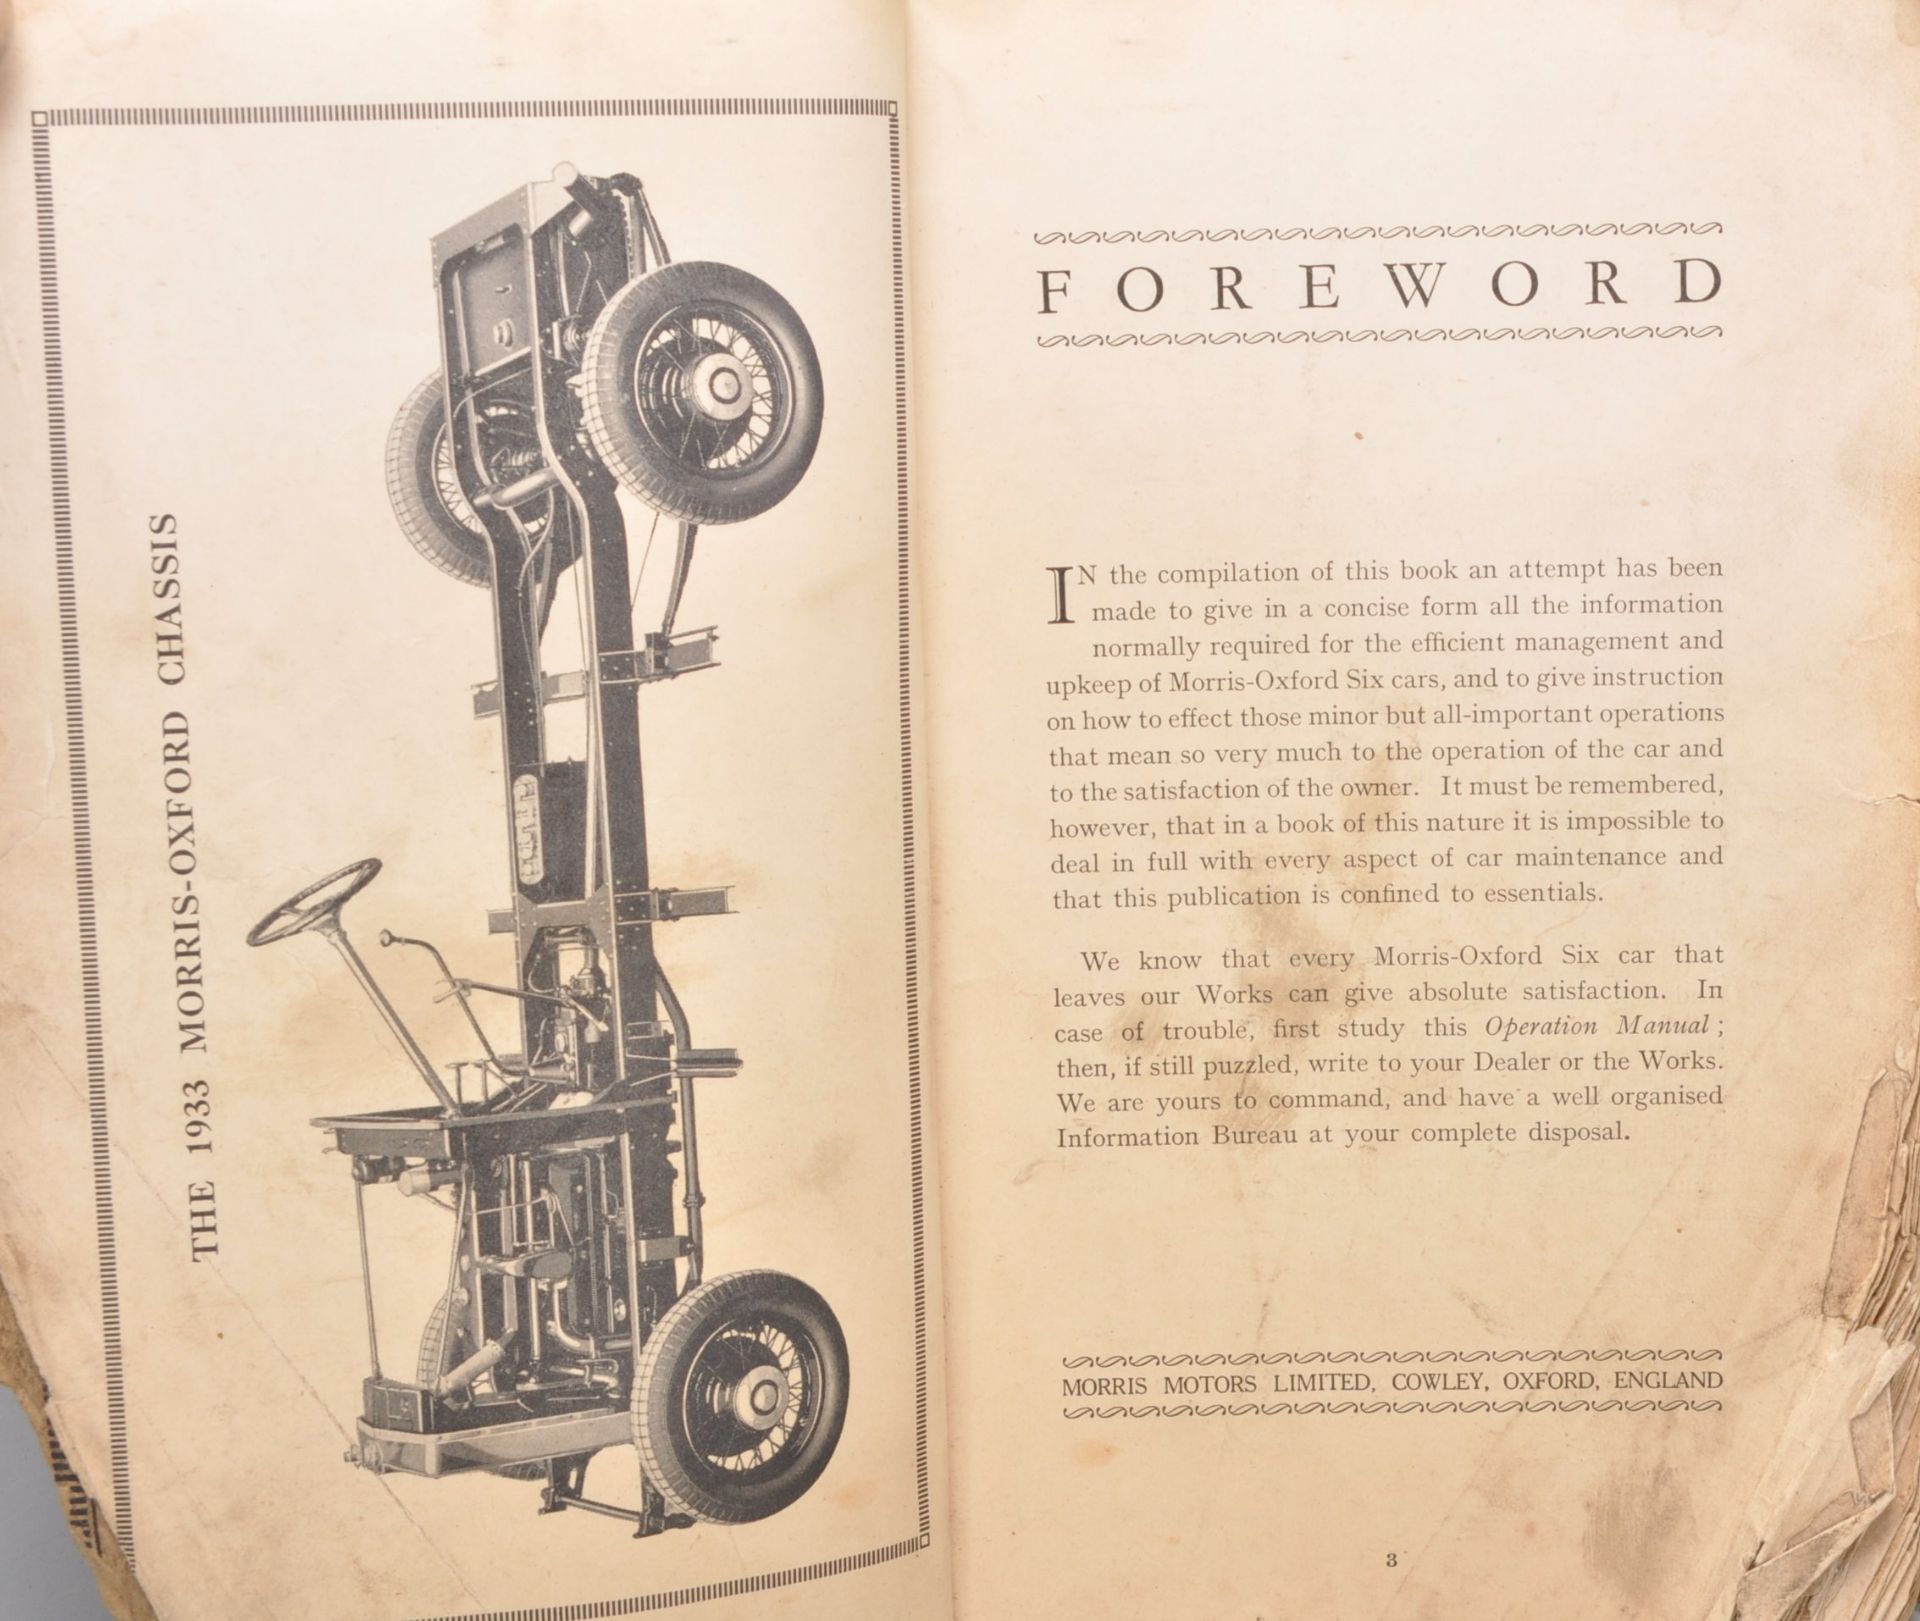 Motoring - A Operation Manual for a Morris-Oxford Six. 1933 edition. - Image 3 of 4